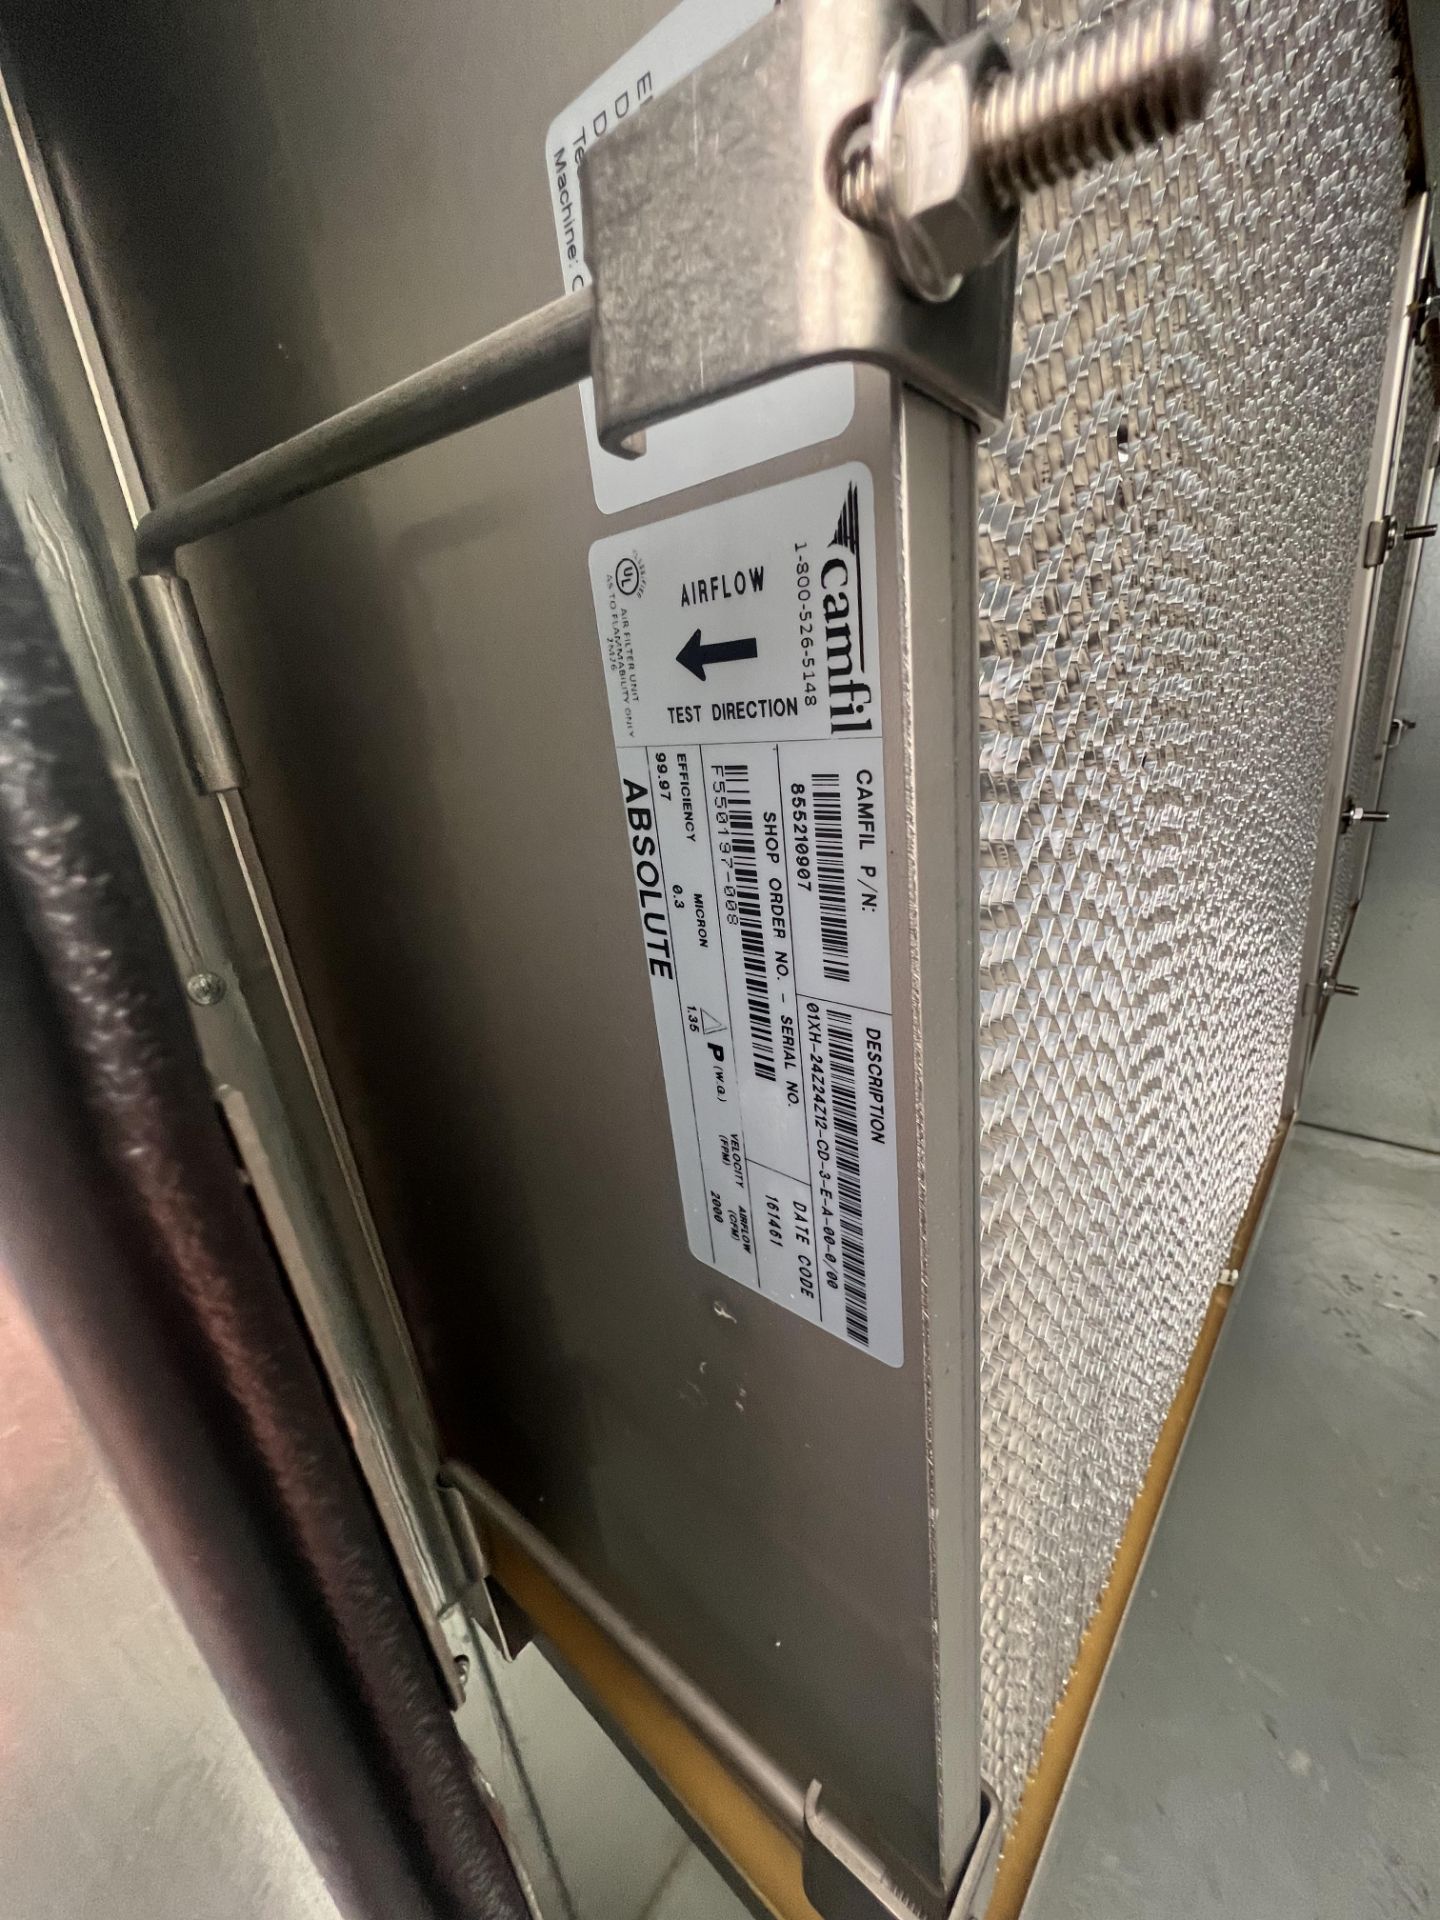 CLIMATE BY DESIGN AIR HANDLING UNIT, MODEL AHU-2E, S/N024632-001-001, 460 V, PREVIOUSLY OPERATING IN - Image 8 of 20